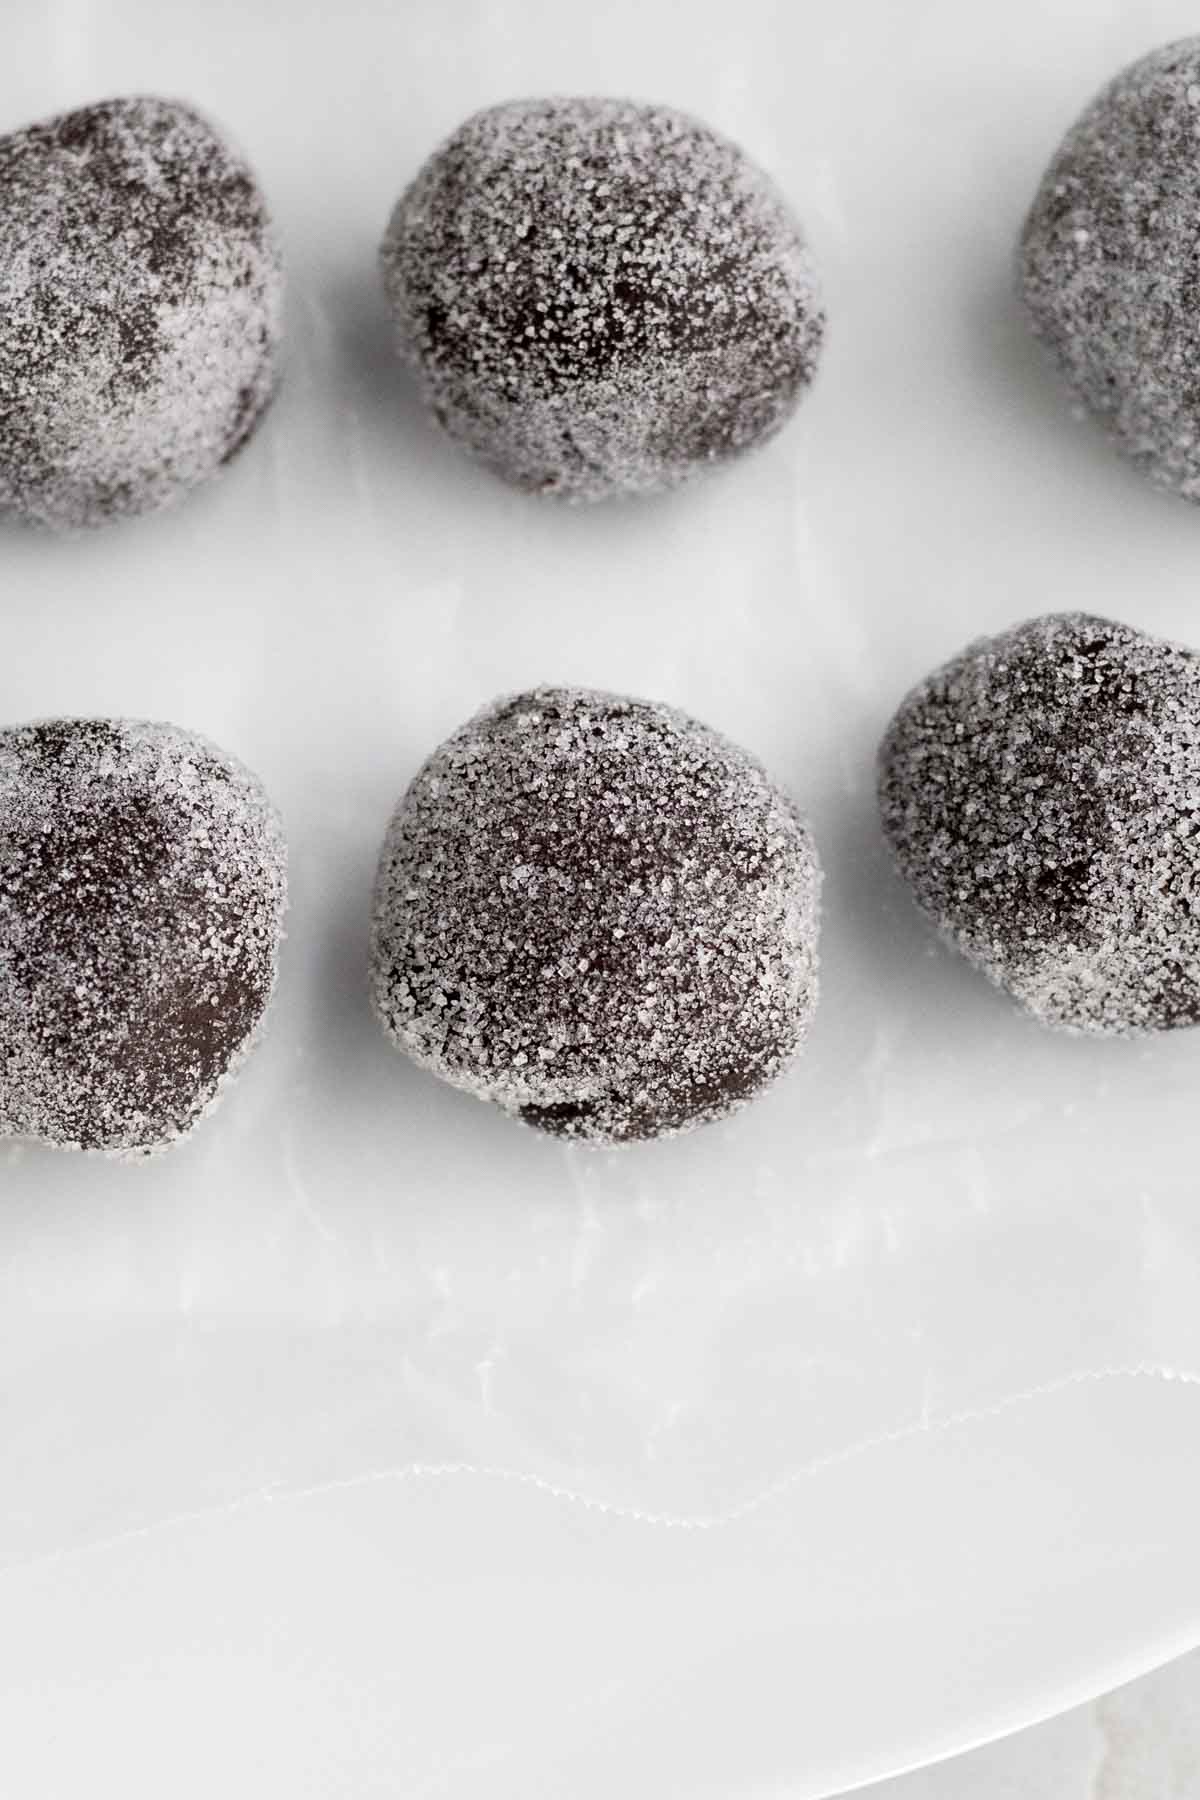 Cookie dough balls coated in granulated sugar.